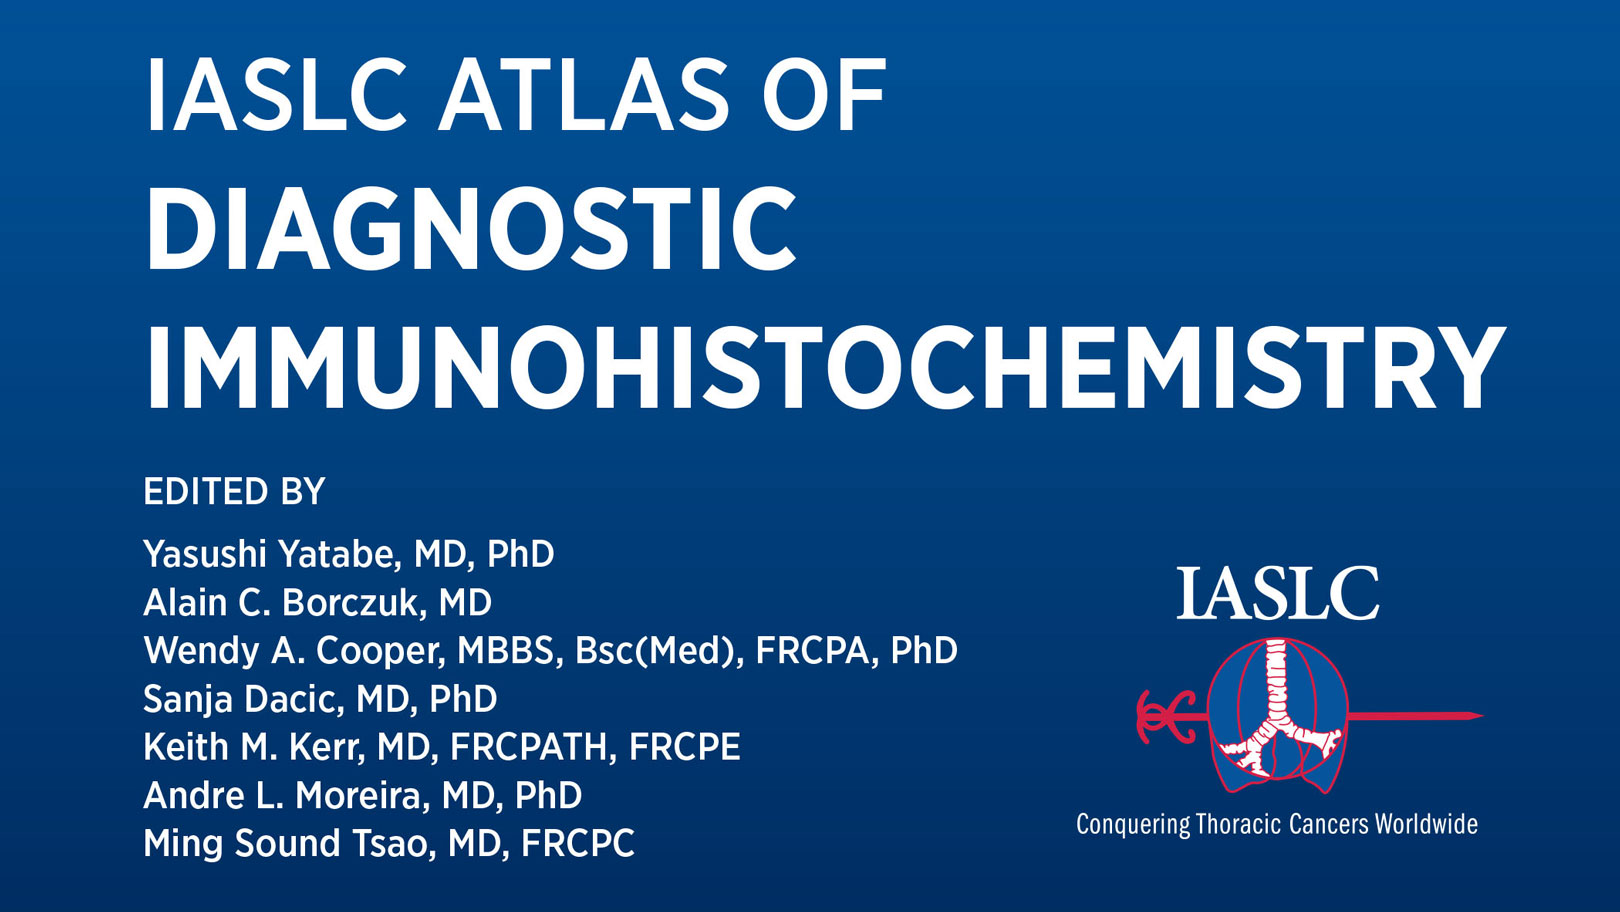 Immunohistochemistry’s Important Role in Diagnosis of Thoracic Cancers Explained in a New Atlas